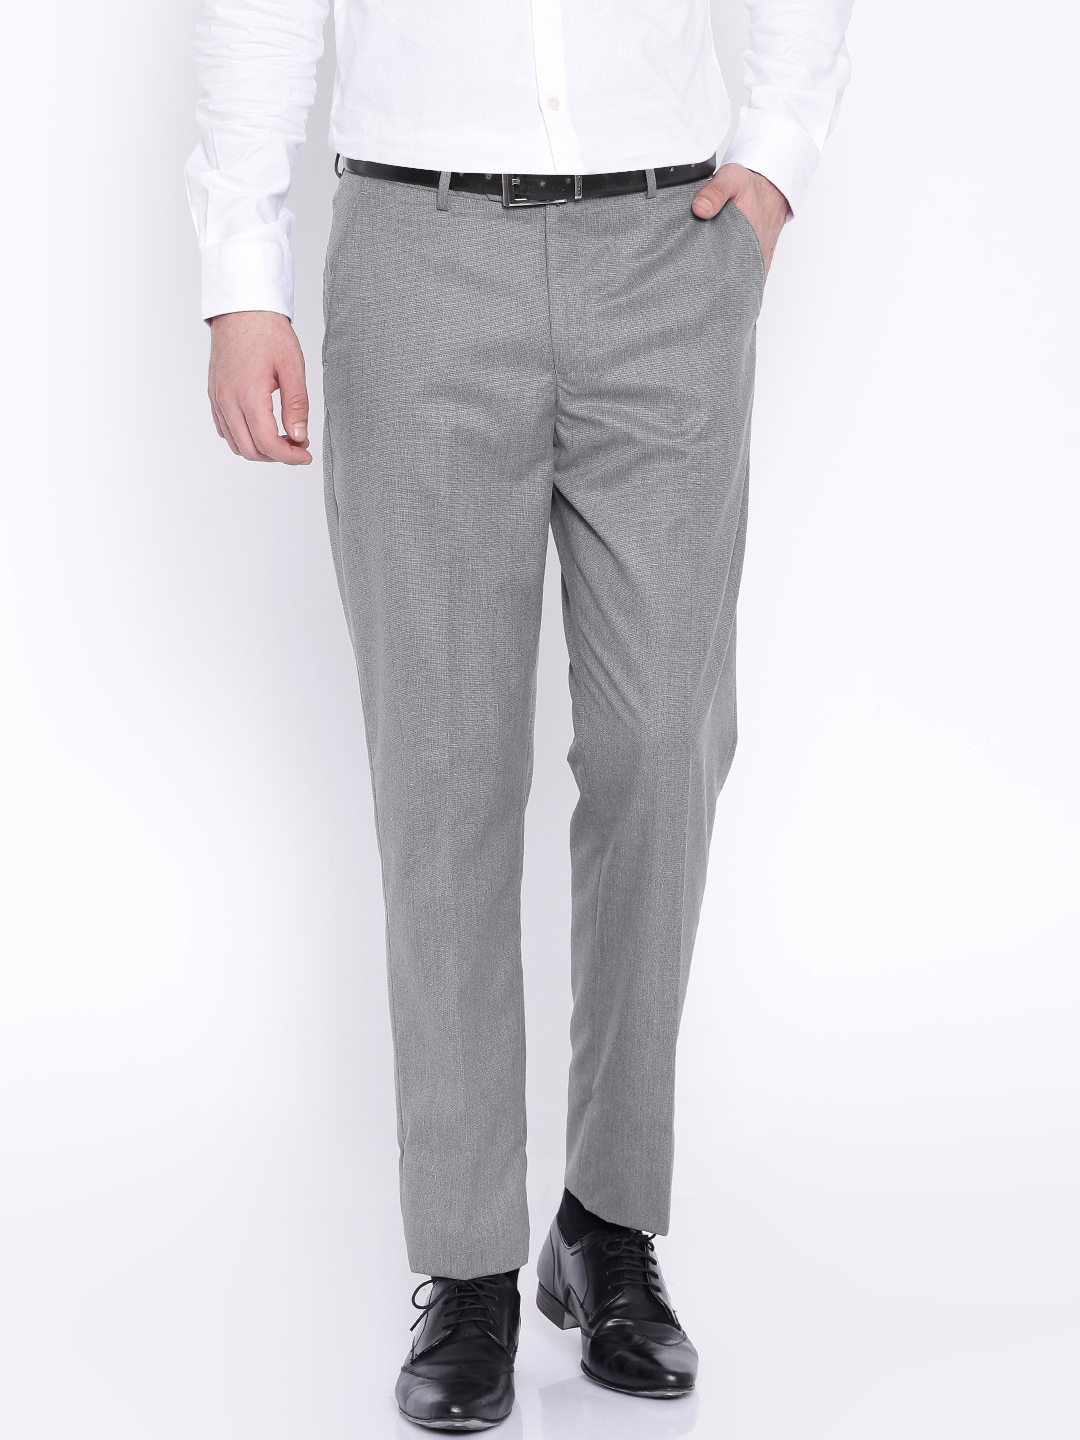 Peter England Casuals Trousers  Chinos Peter England Grey Trousers for  Men at Peterenglandcom